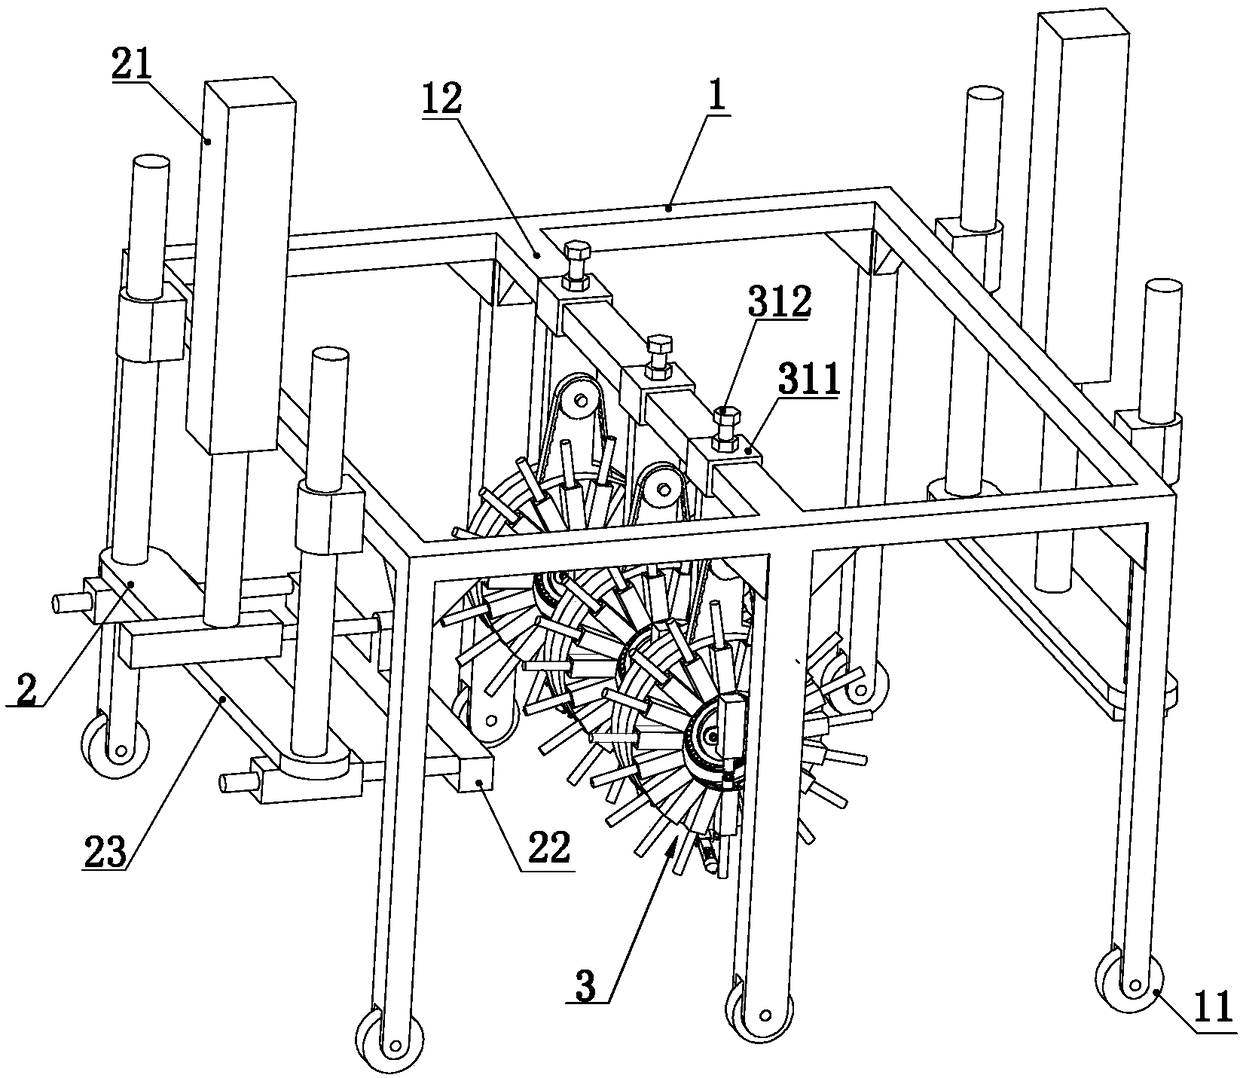 Device for welding screw rod sets in ship manufacturing process